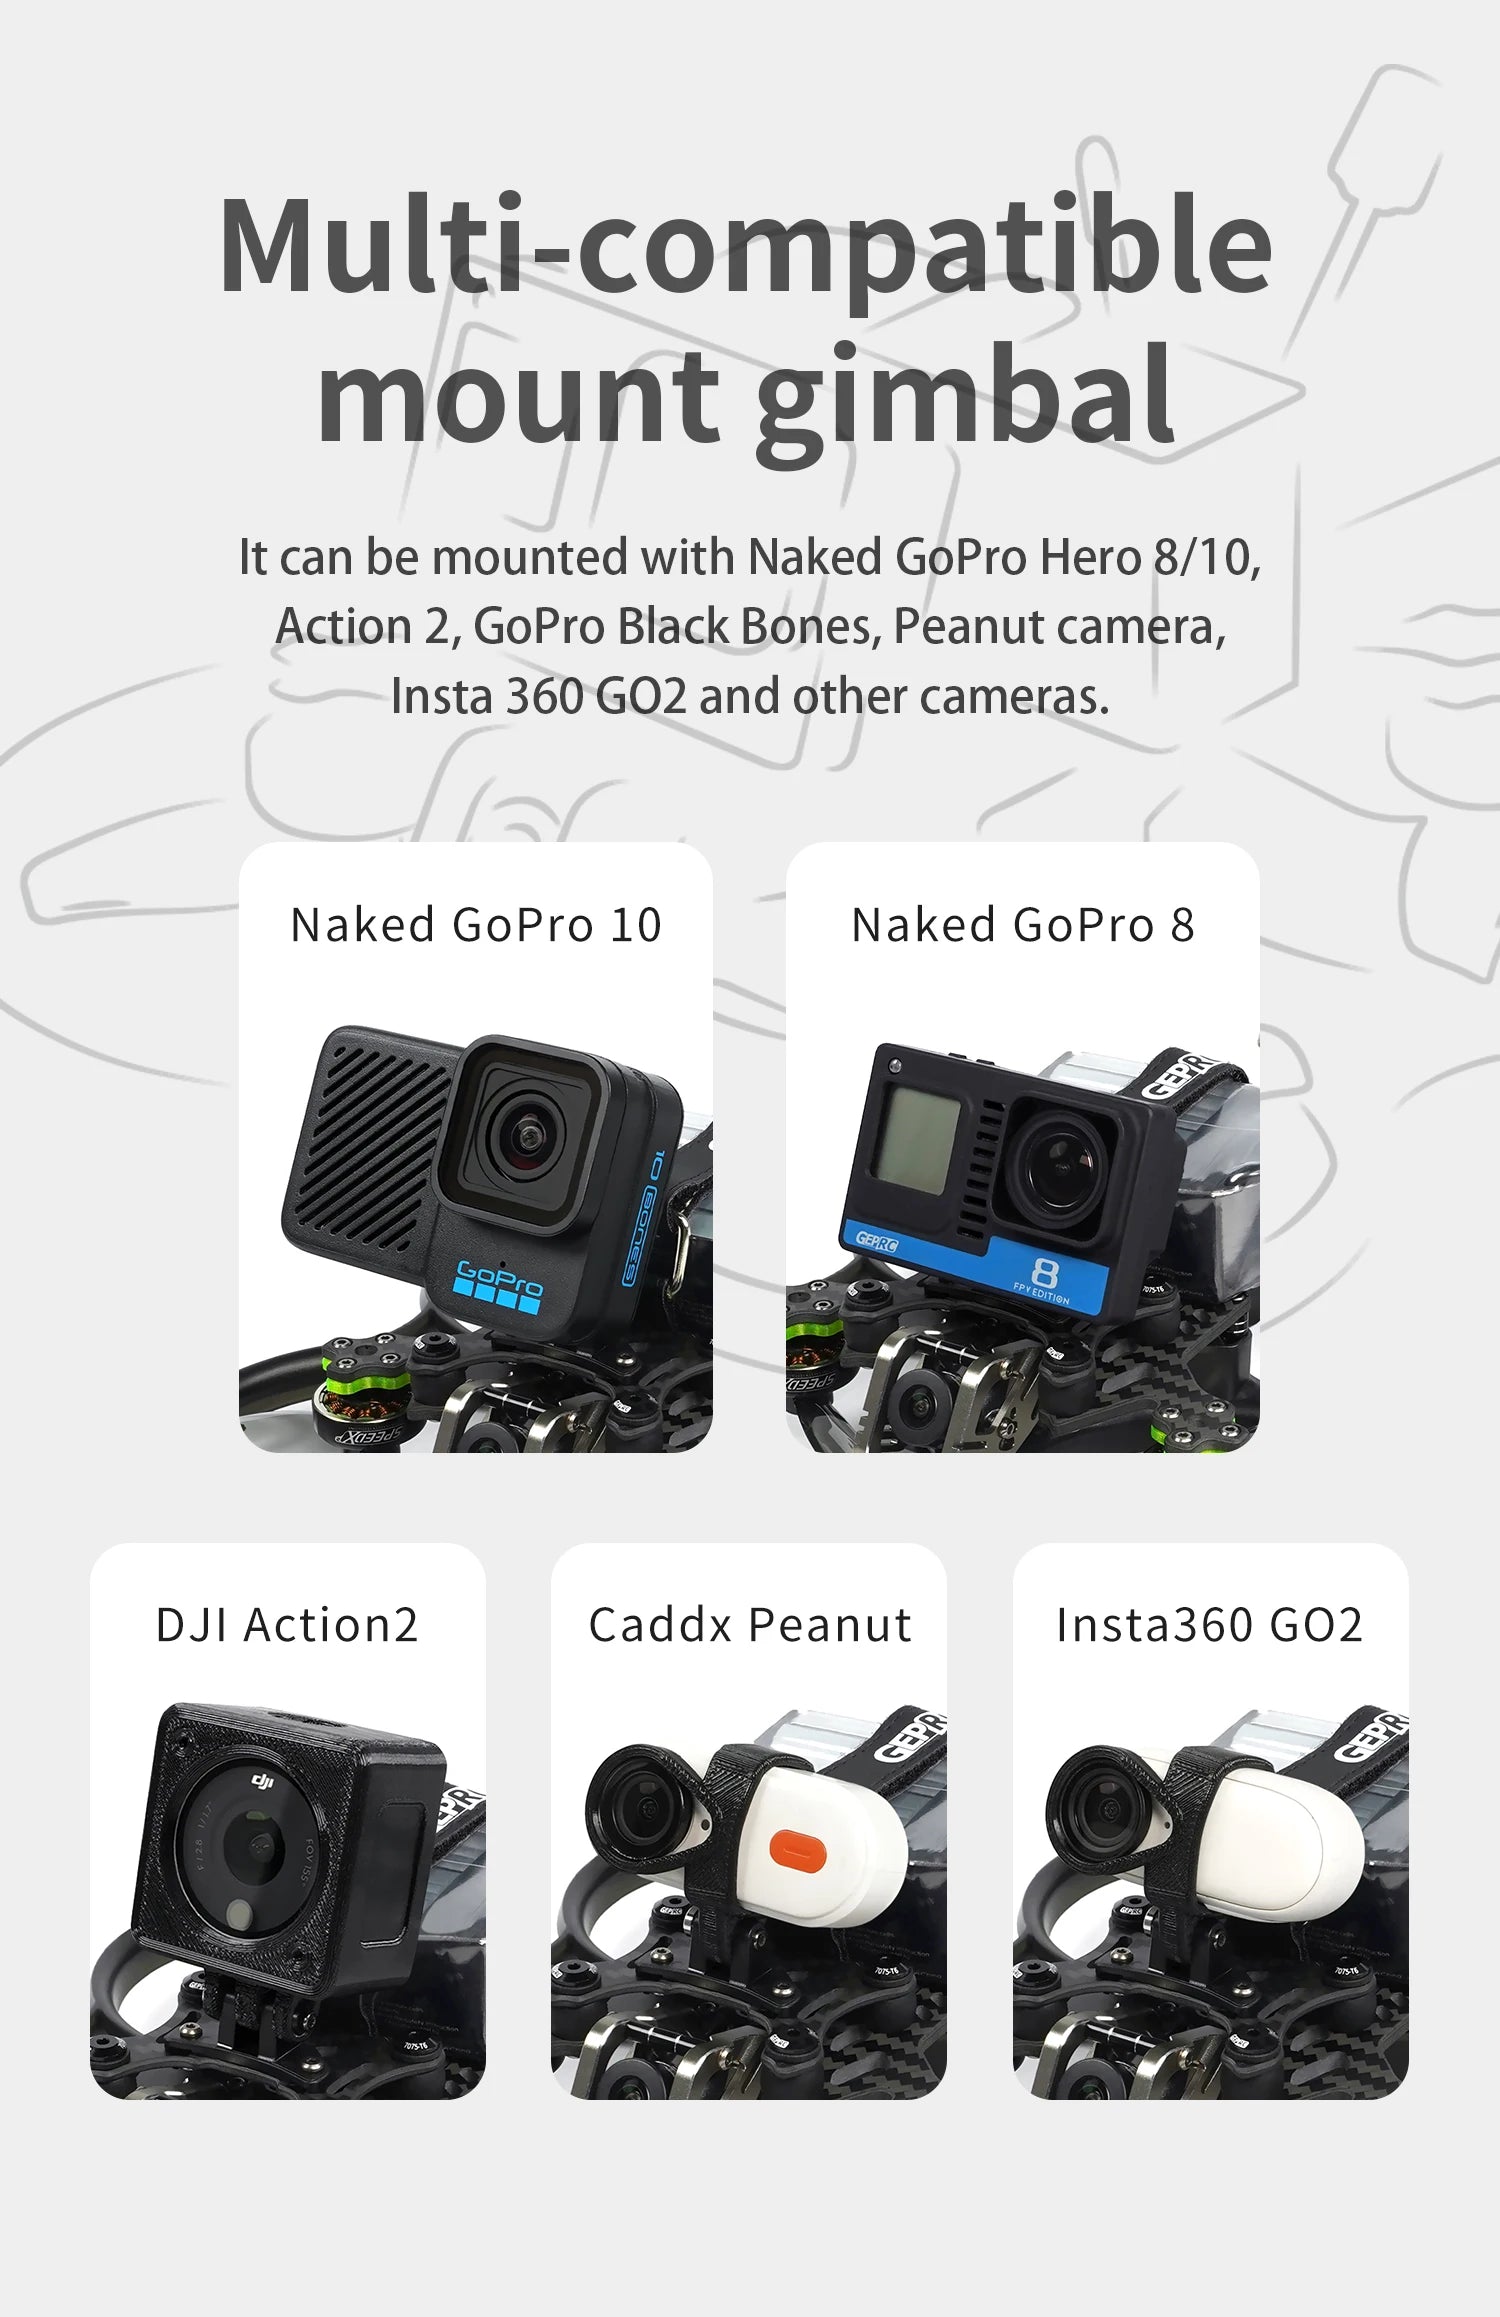 GEPRC Cinebot 30 FPV Drone, gimbal can be mounted with Naked GoPro Hero 8/10, Action 2, Go